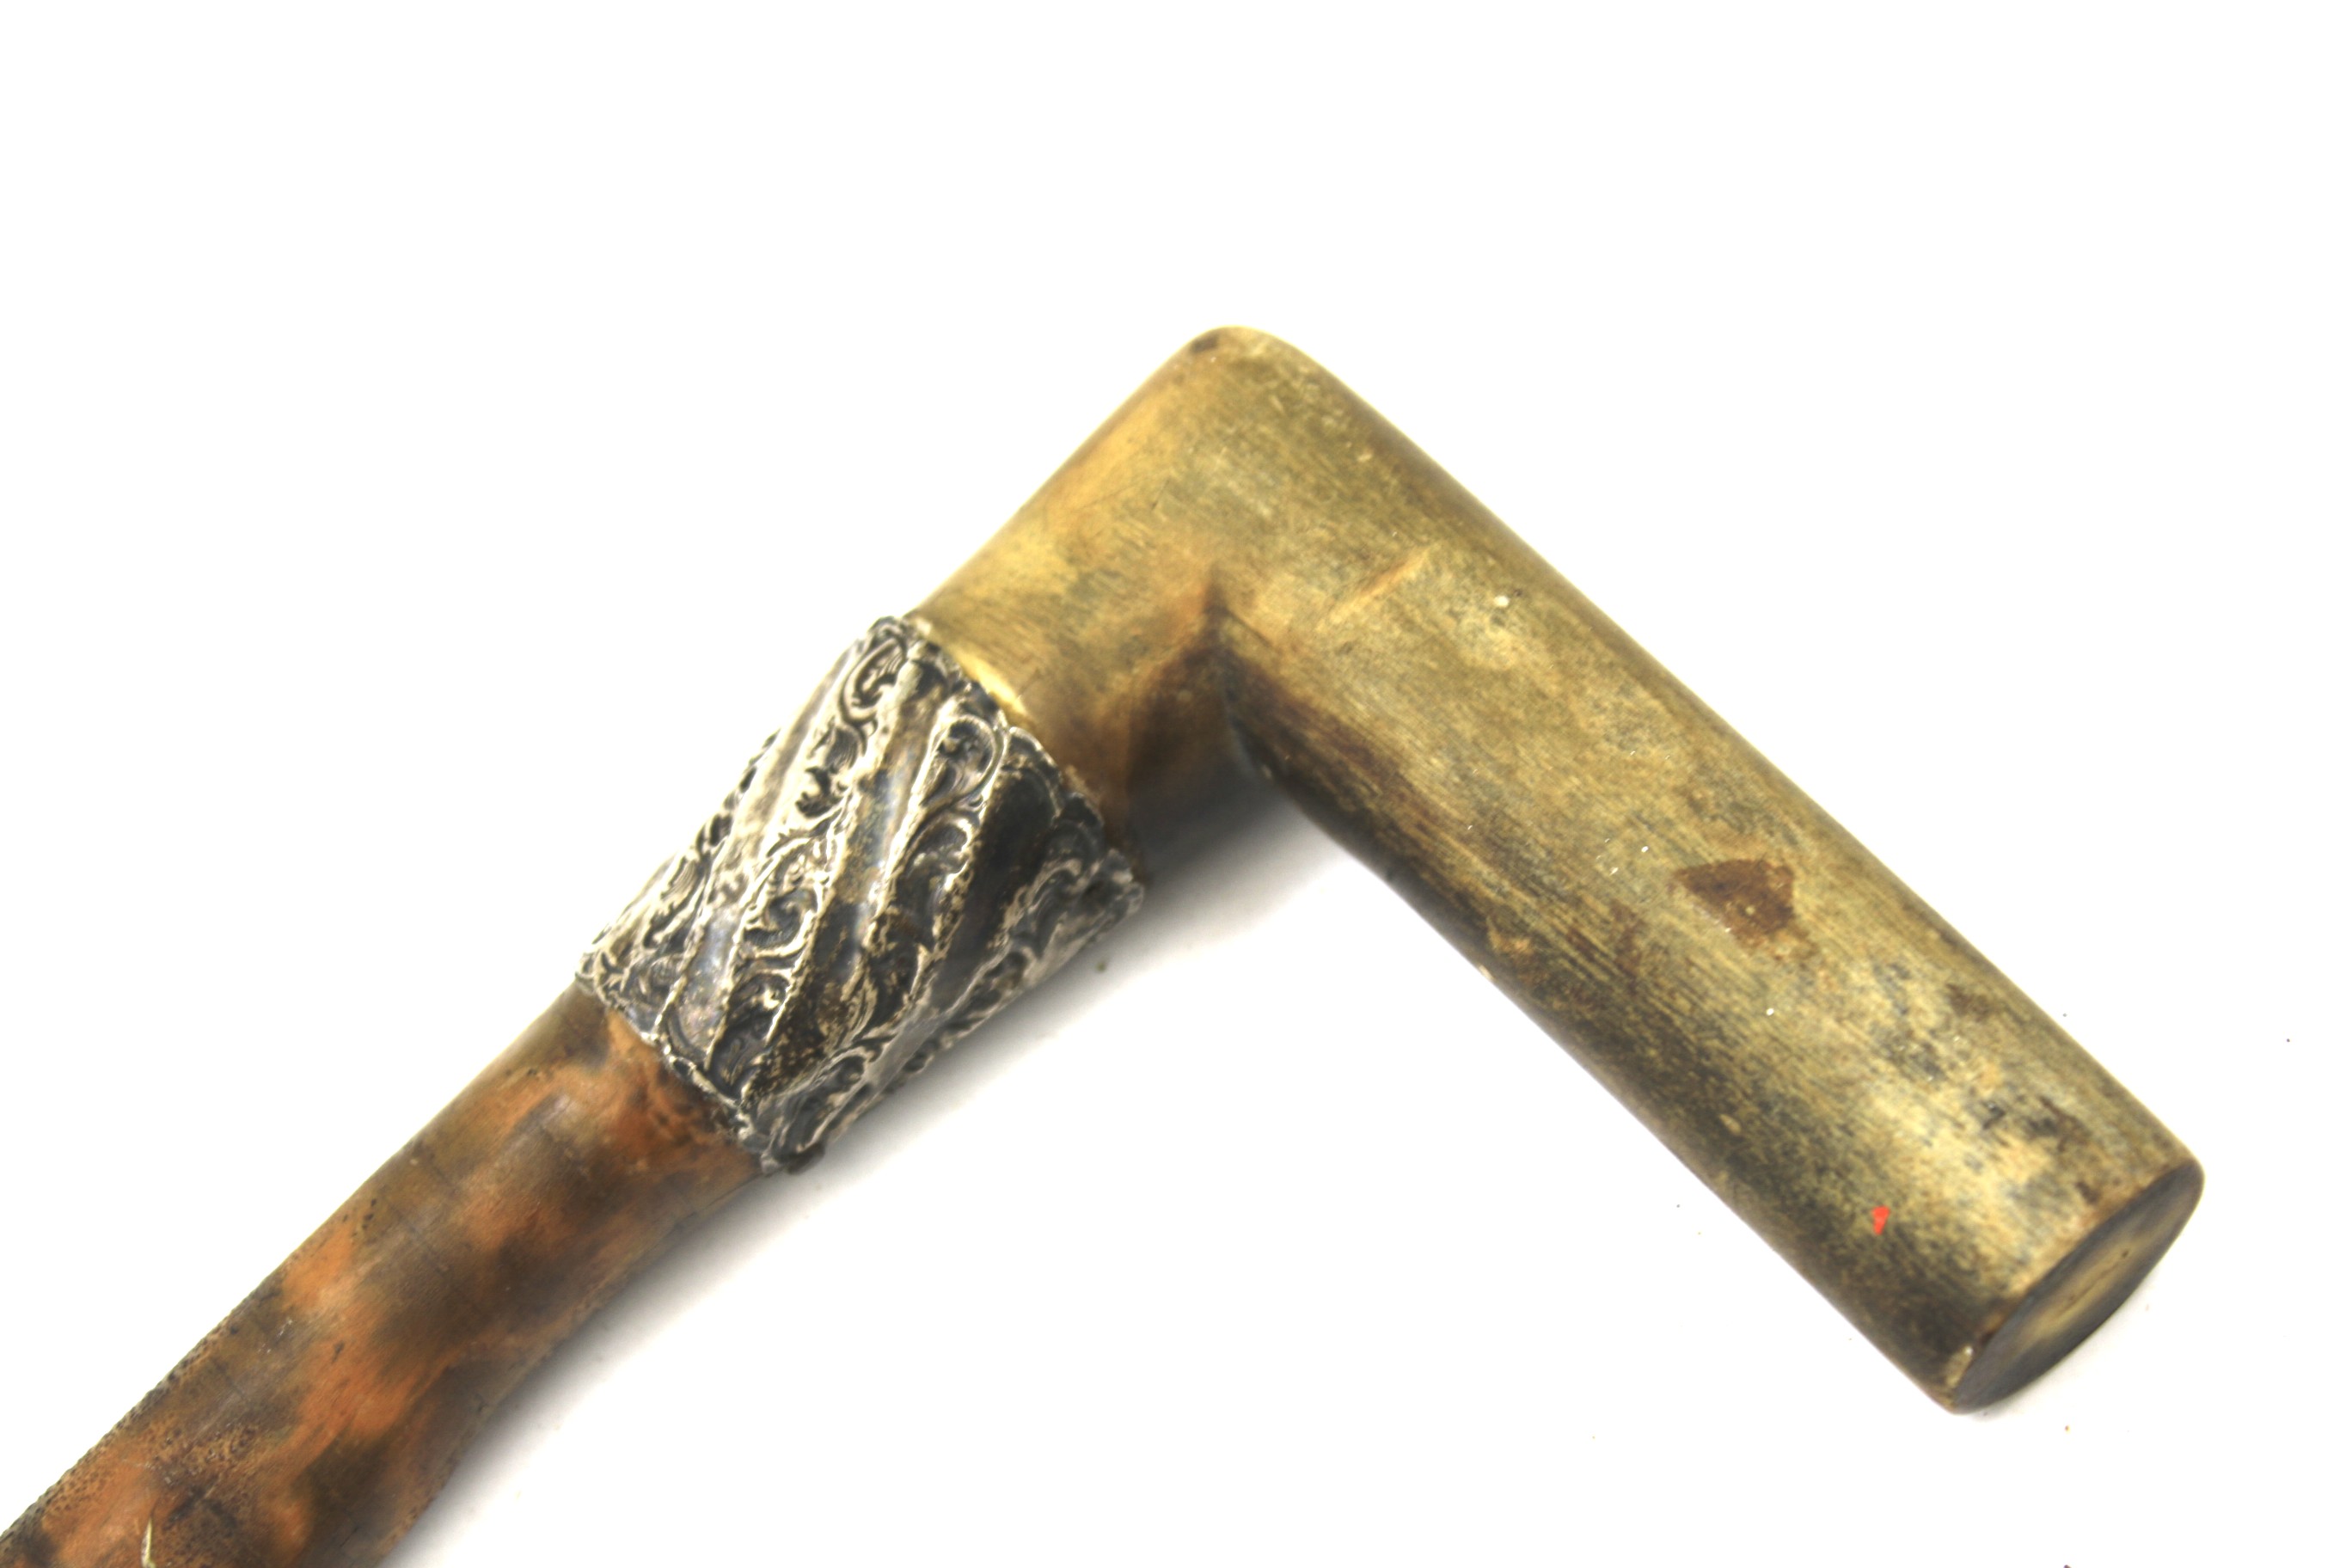 An antique walking cane with a horn handle. - Image 2 of 2